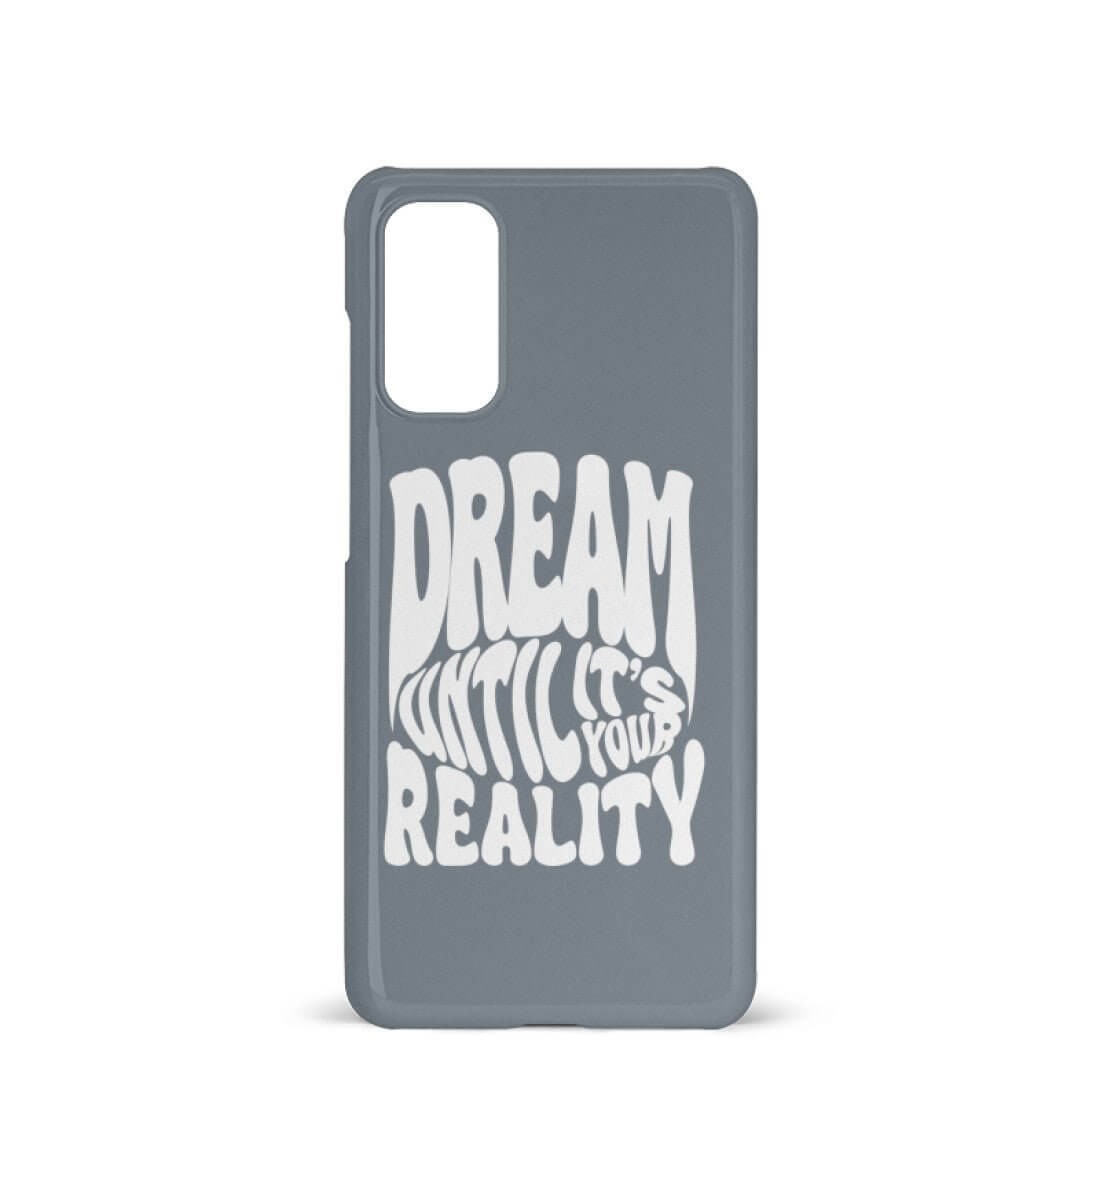 'DREAM UNTIL IT'S YOUR REALITY' - Samsung Galaxy S20 Handyhülle - GODVIBES